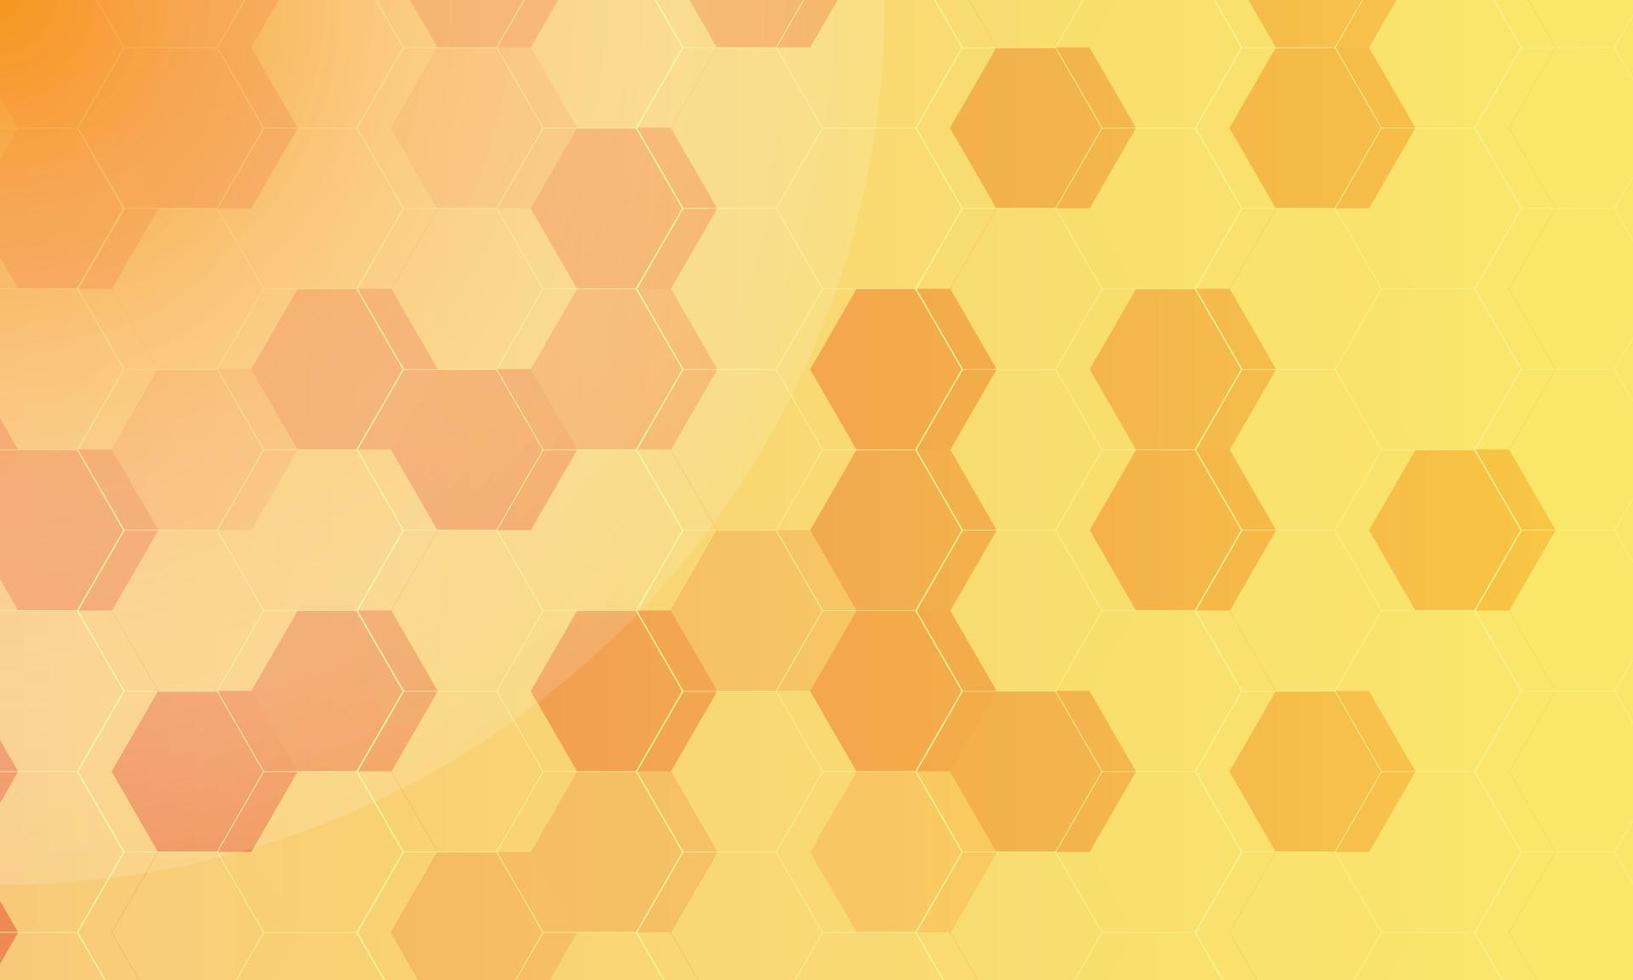 honeycomb pattern. seamless geometric hive background. abstract honeycomb. vector illustration. design for the background display, flyers, ad honey, fabric, clothes, texture, textile pattern.